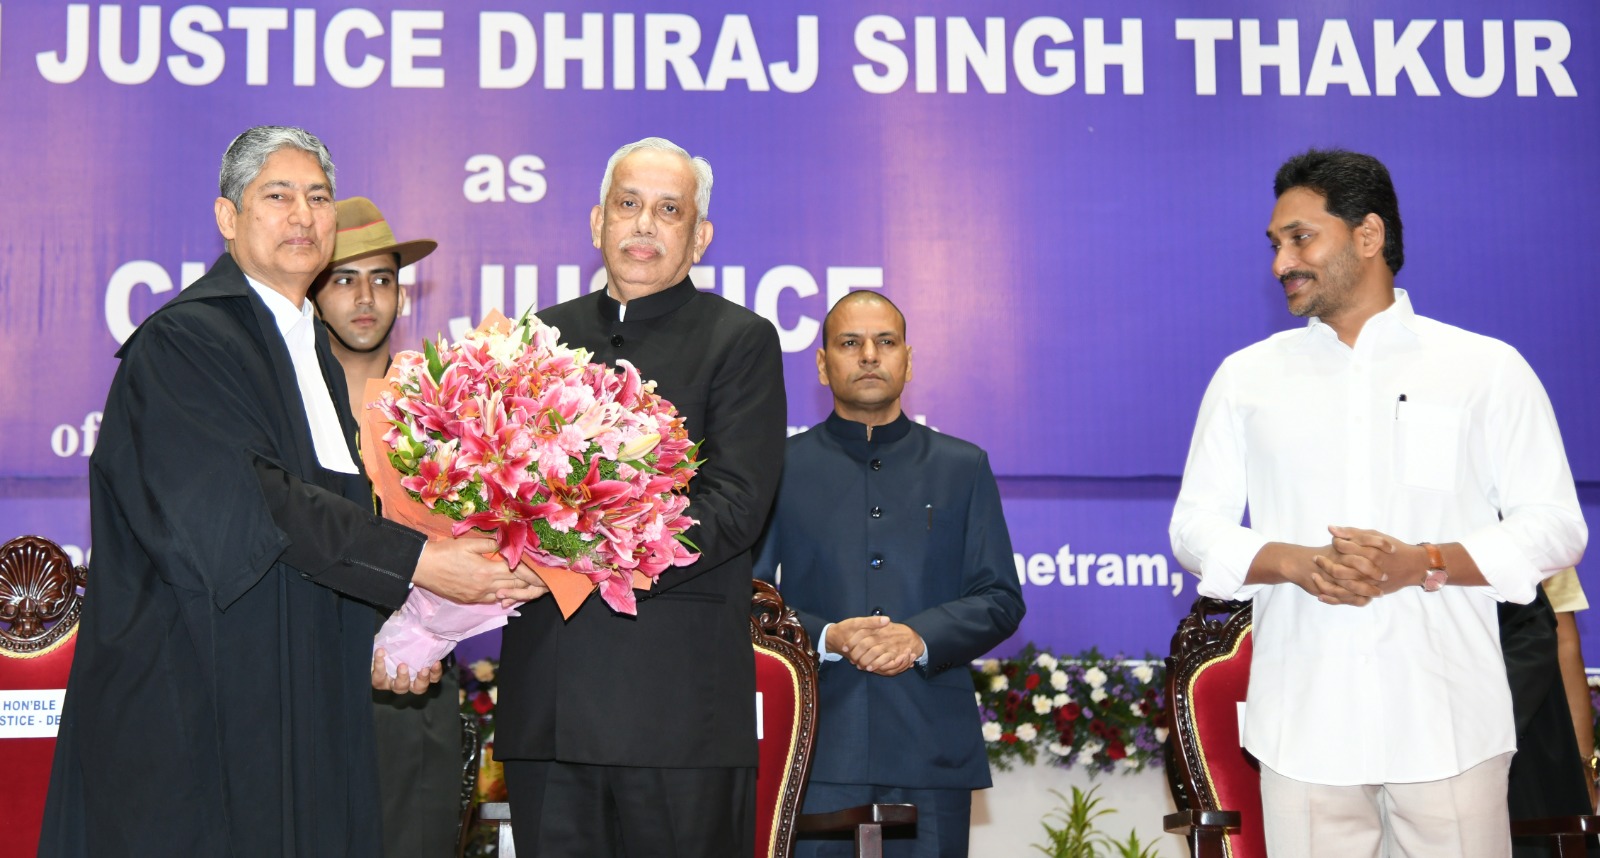 Justice Dhiraj Singh Thakur sworn in as Chief Justice of AP High Court